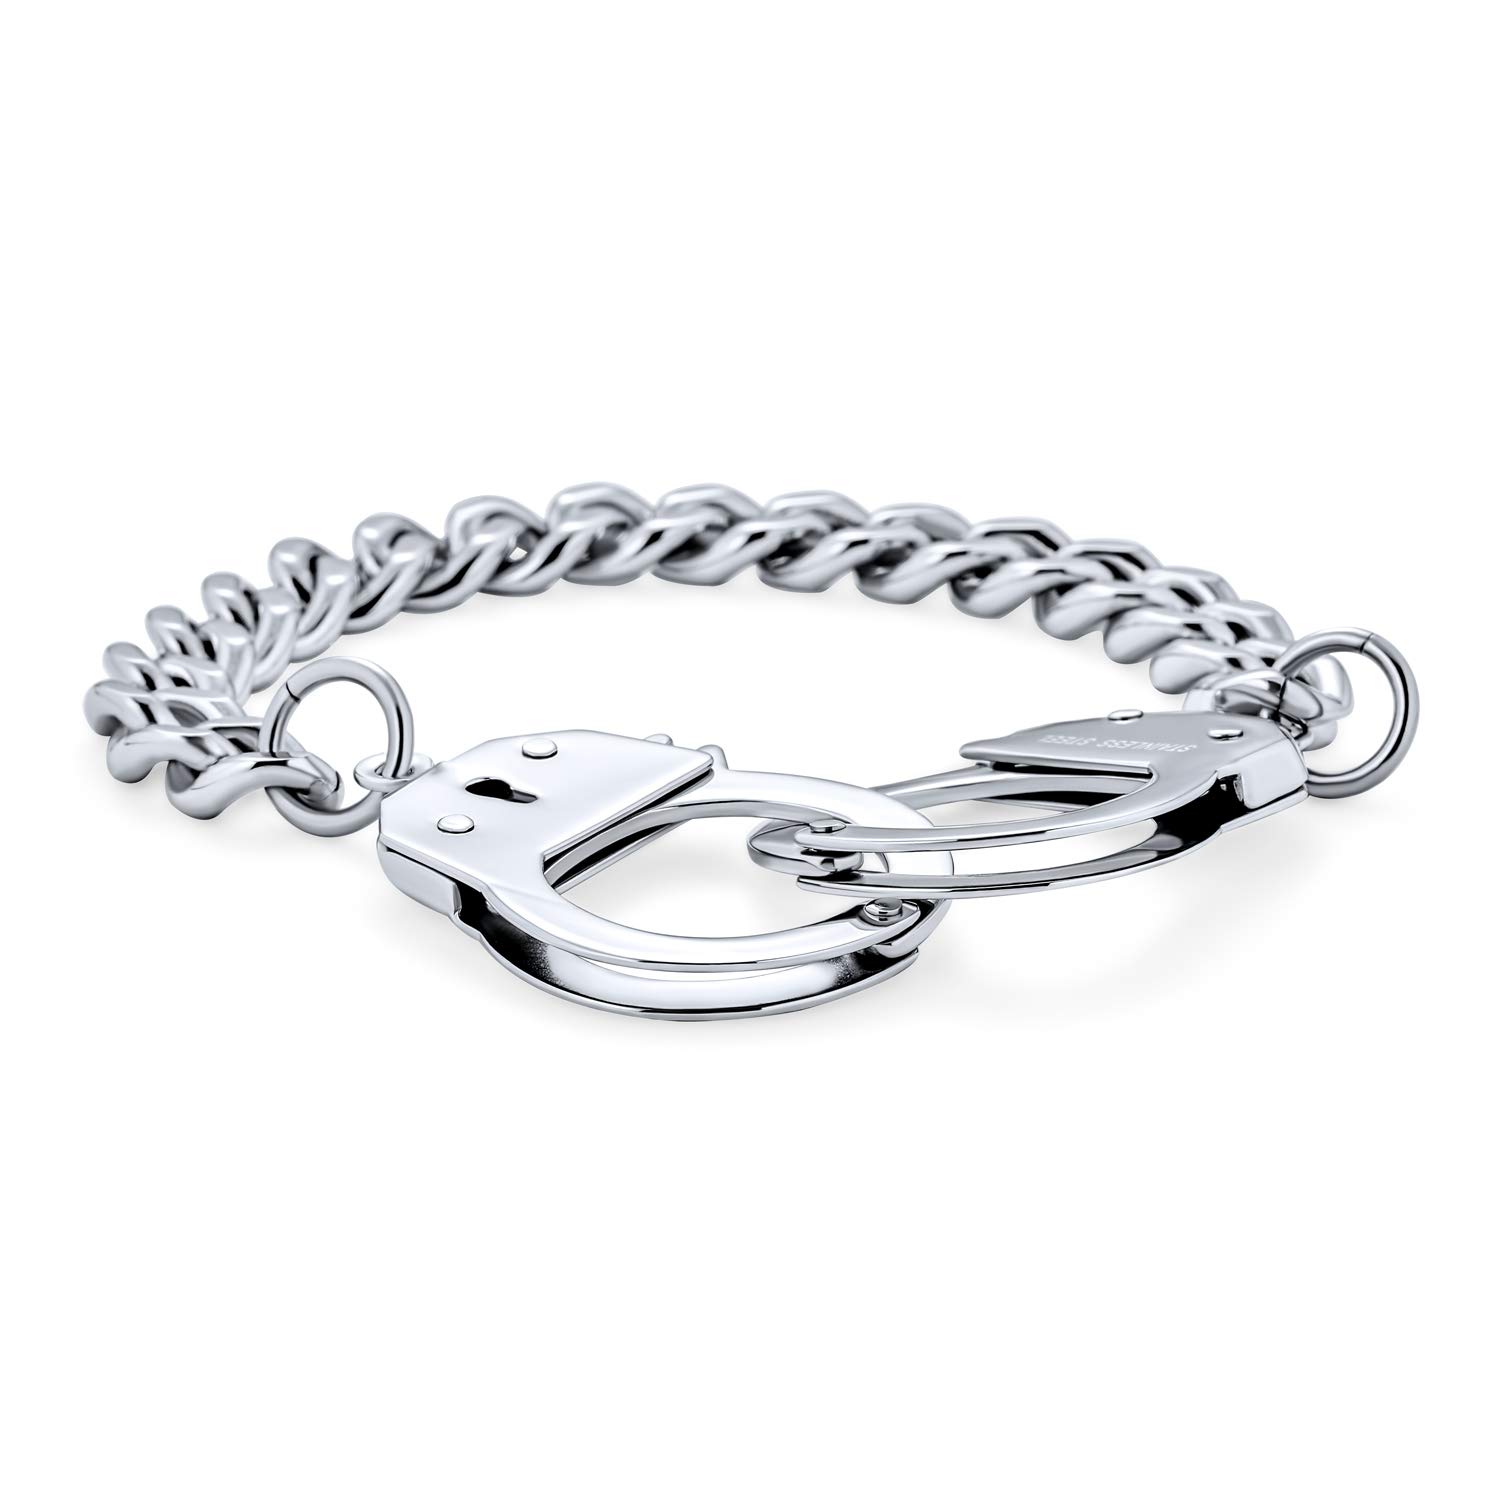 Biker Jewelry Interlocking Handcuff Bracelet for Men with Padlock Curb Chain Black IP Silver Tone Stainless Steel 8,8.5 Inch